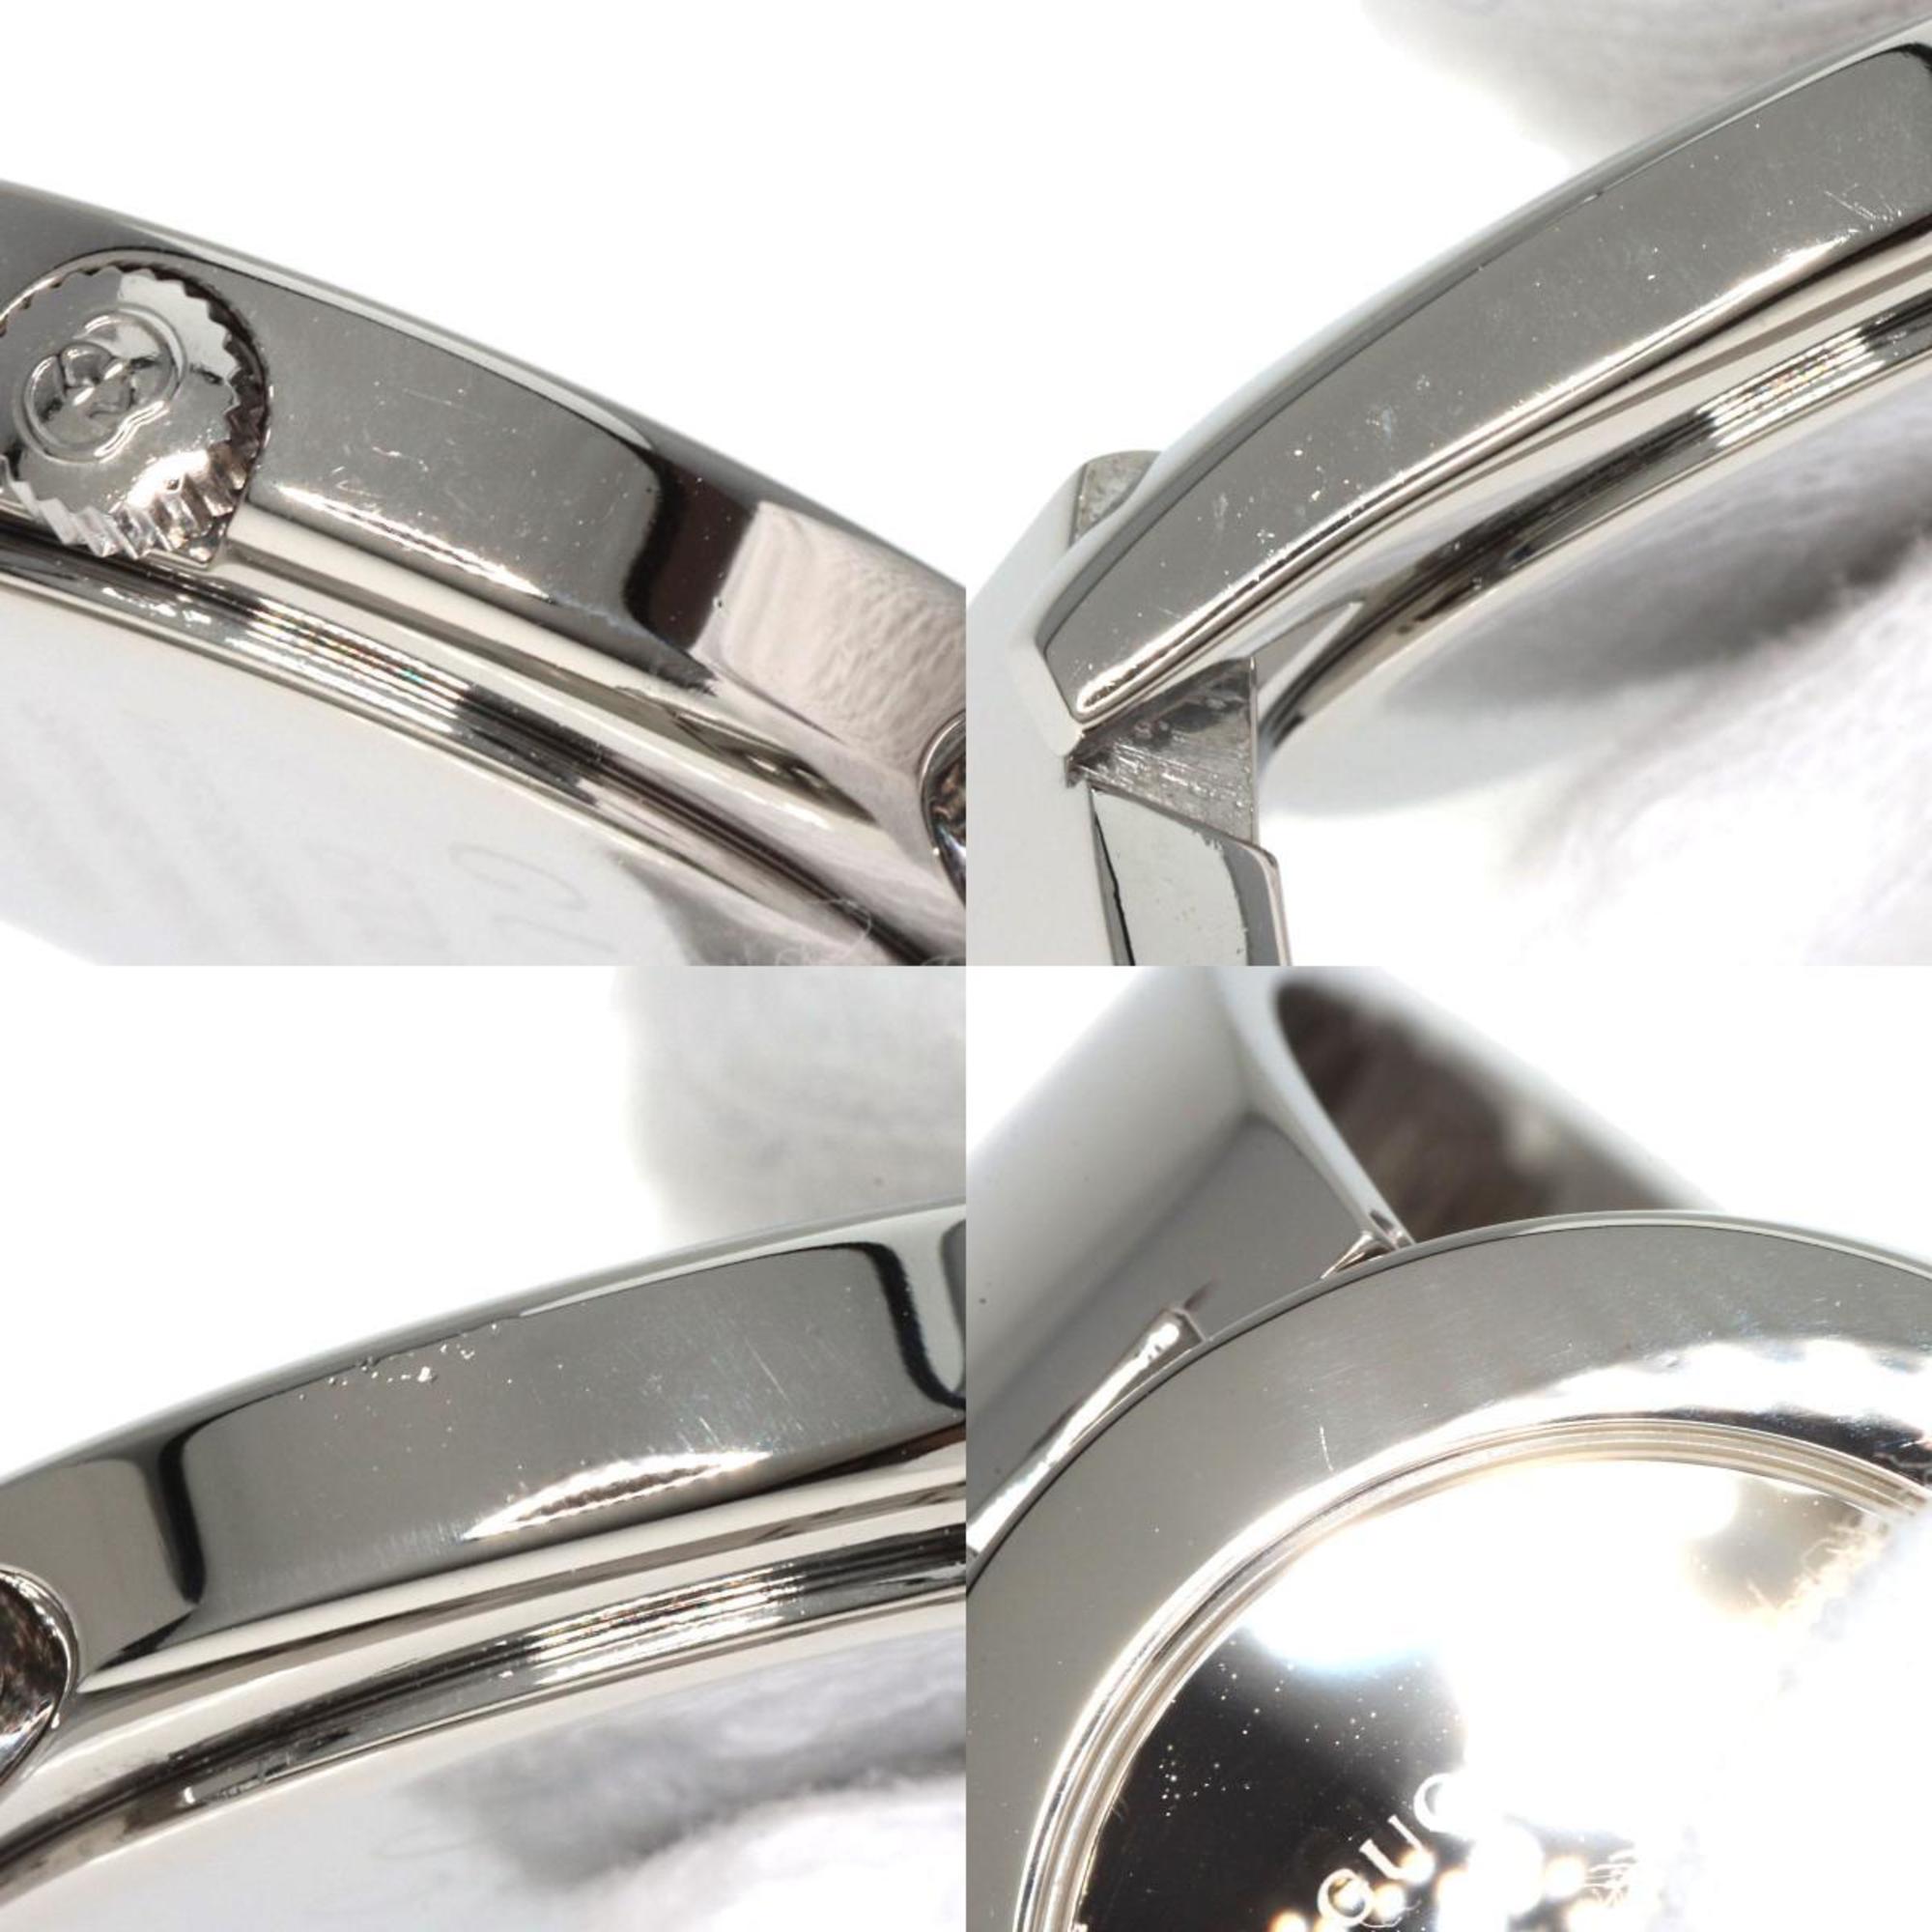 Gucci 6700L Watch Stainless Steel/SS Ladies GUCCI